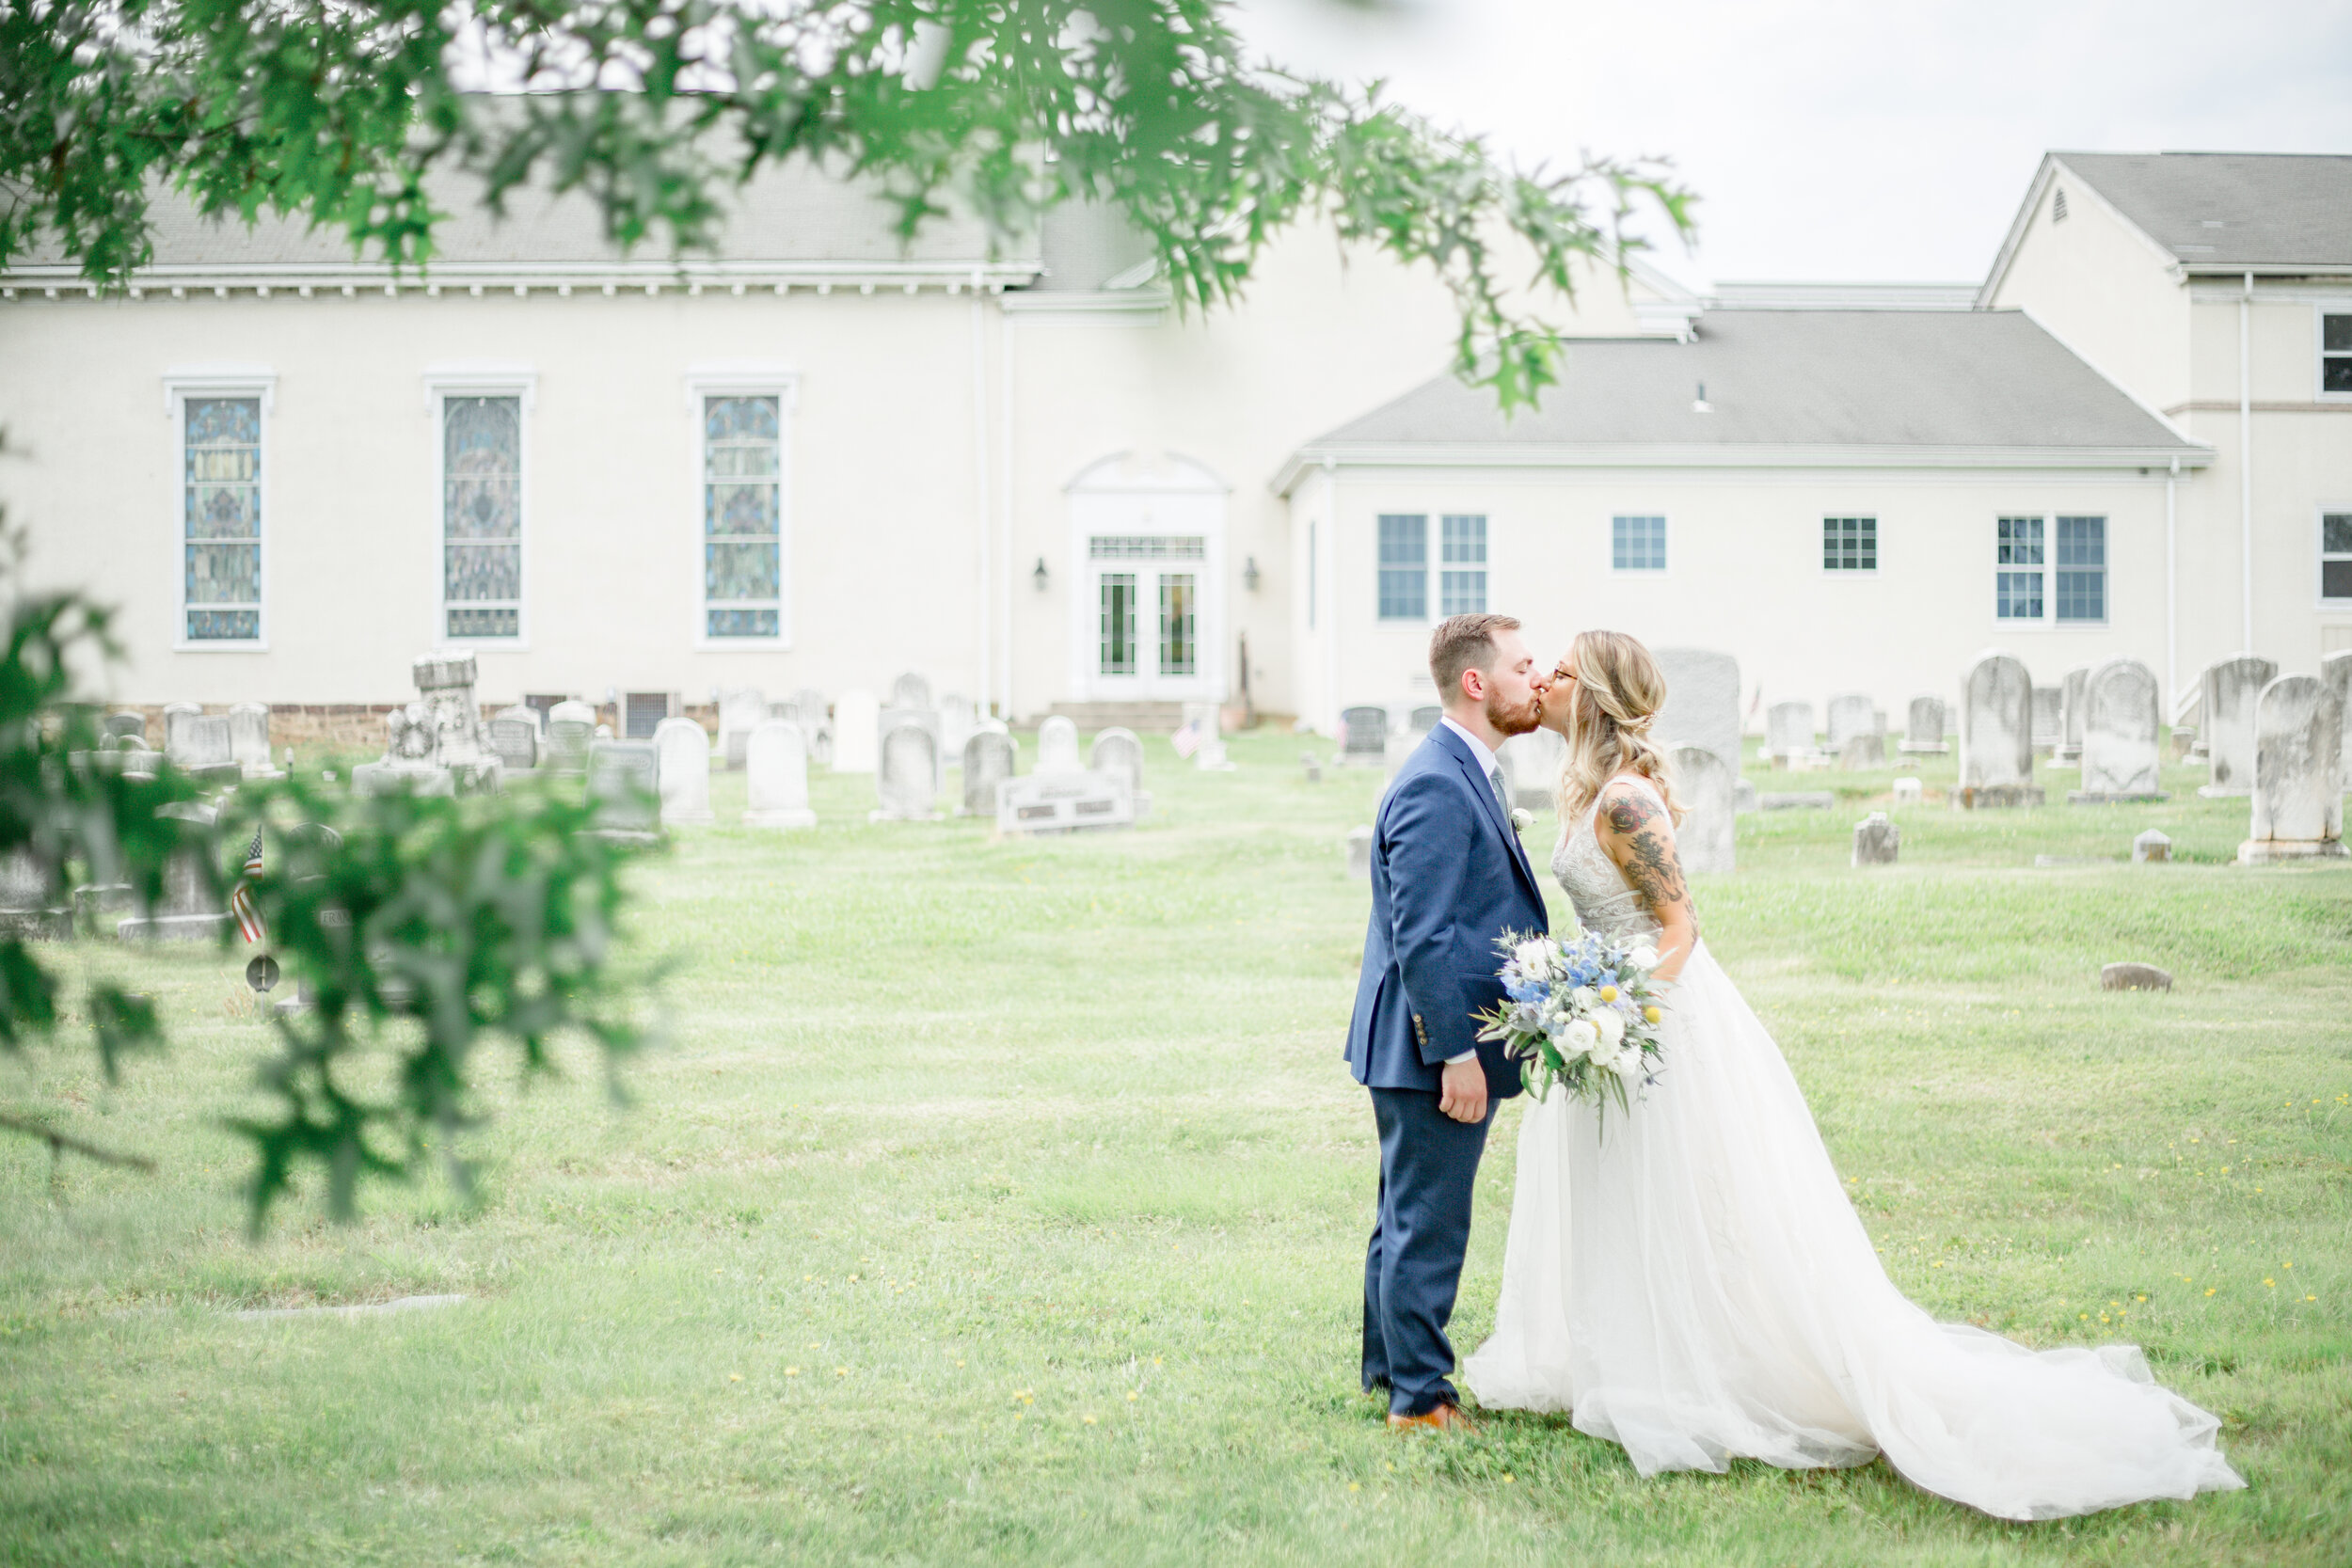 From Middle School To Marriage - A Charming Bucks County Backyard Wedding 